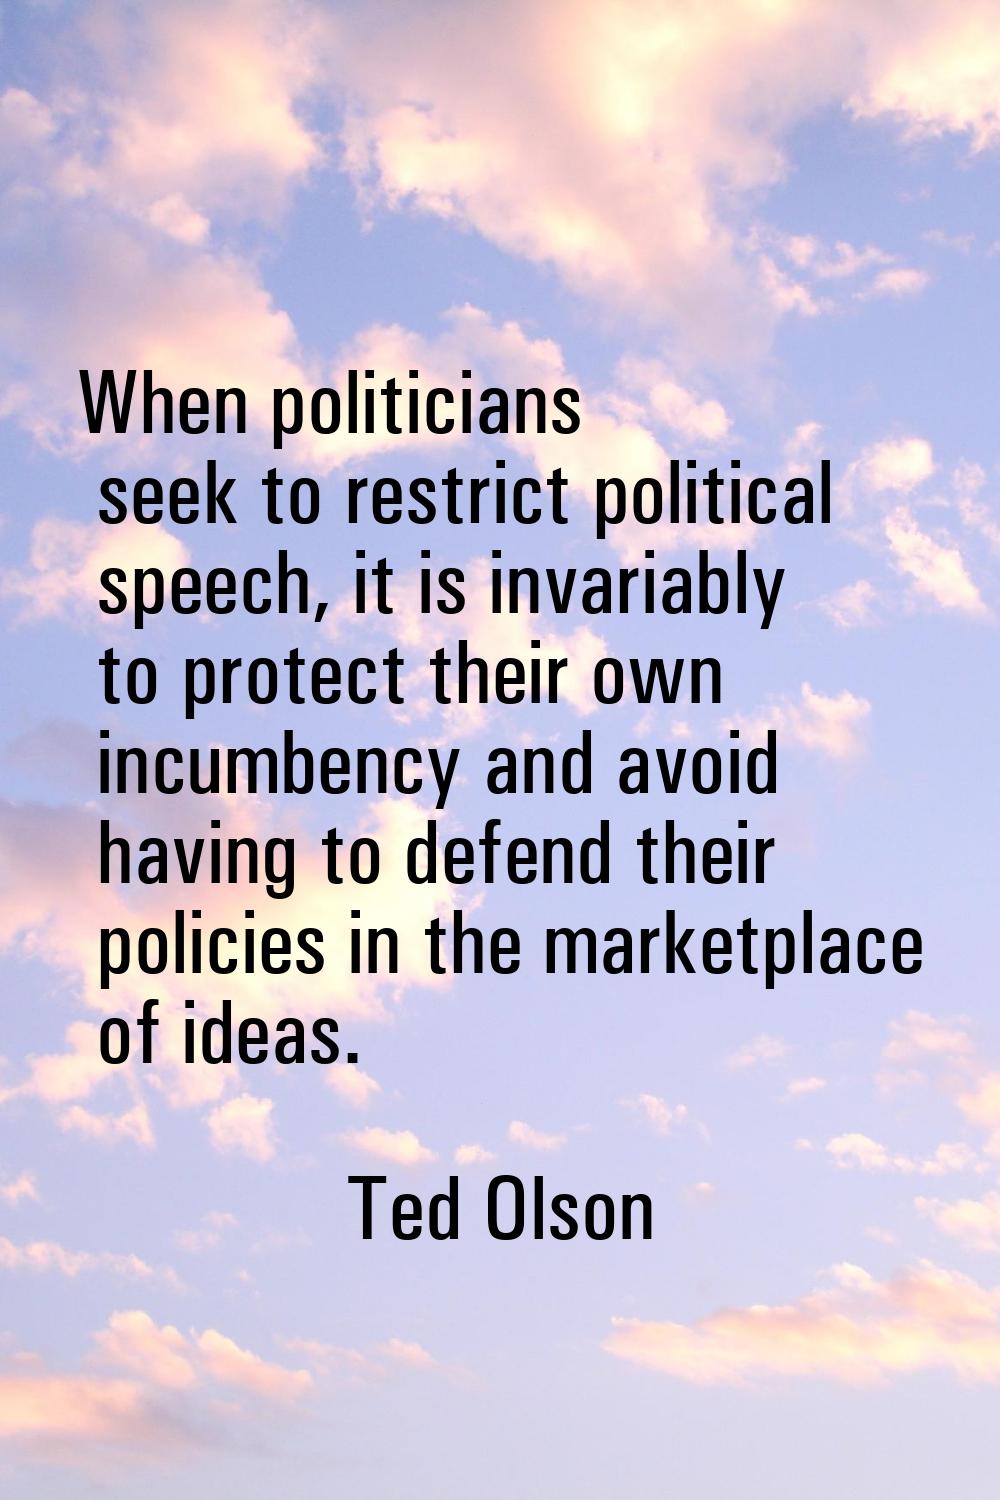 When politicians seek to restrict political speech, it is invariably to protect their own incumbenc